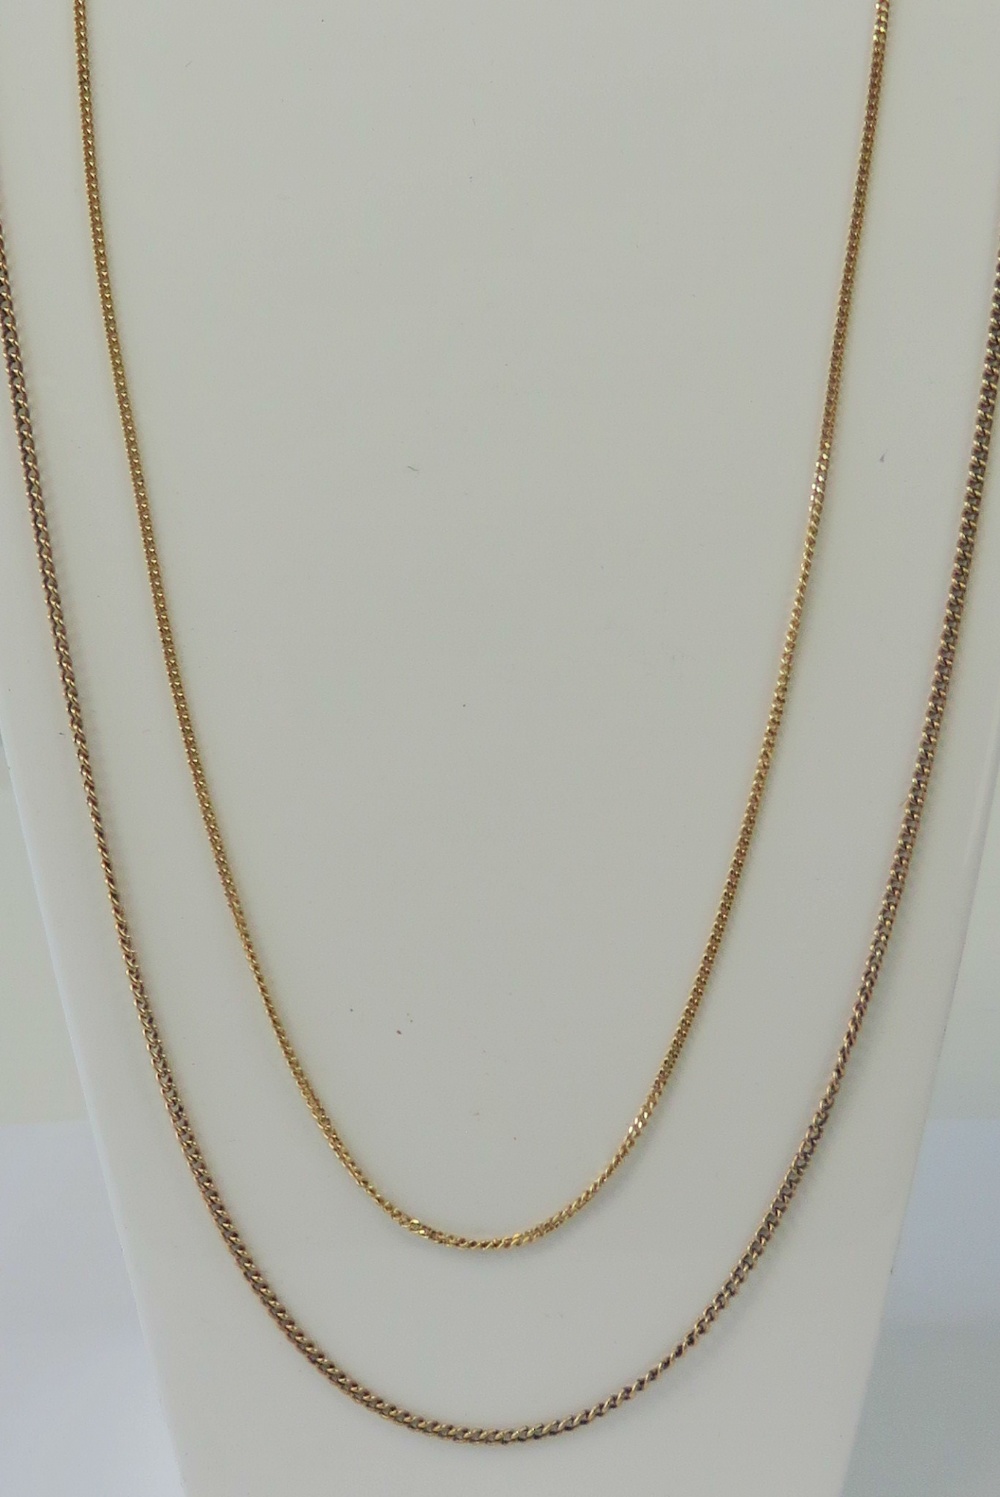 Two 9ct gold fine link chains, 64cm and 46cm respective lengths, 8.